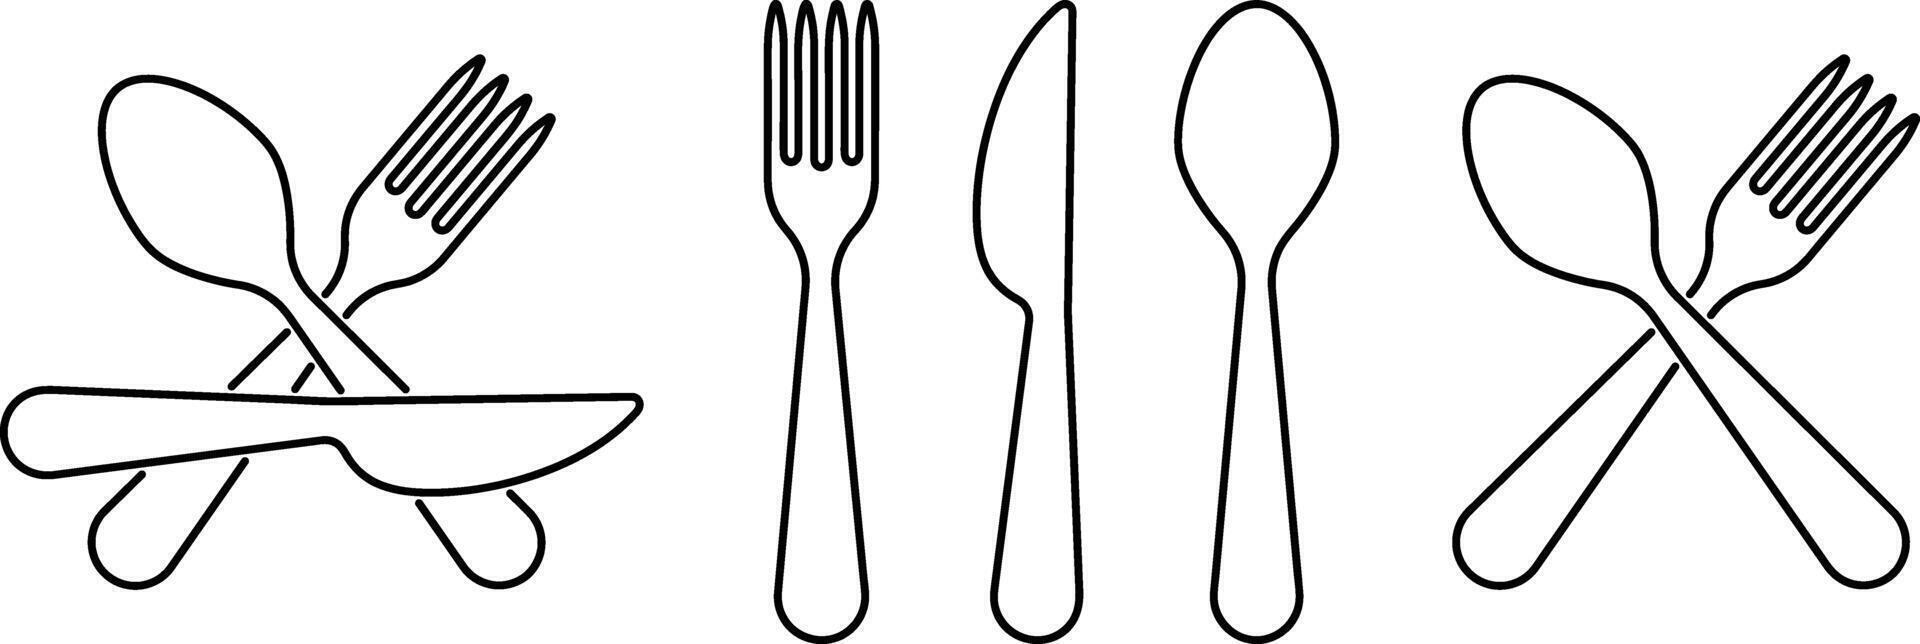 Stencil fork spoon knife icon Food clipart Vector illustration